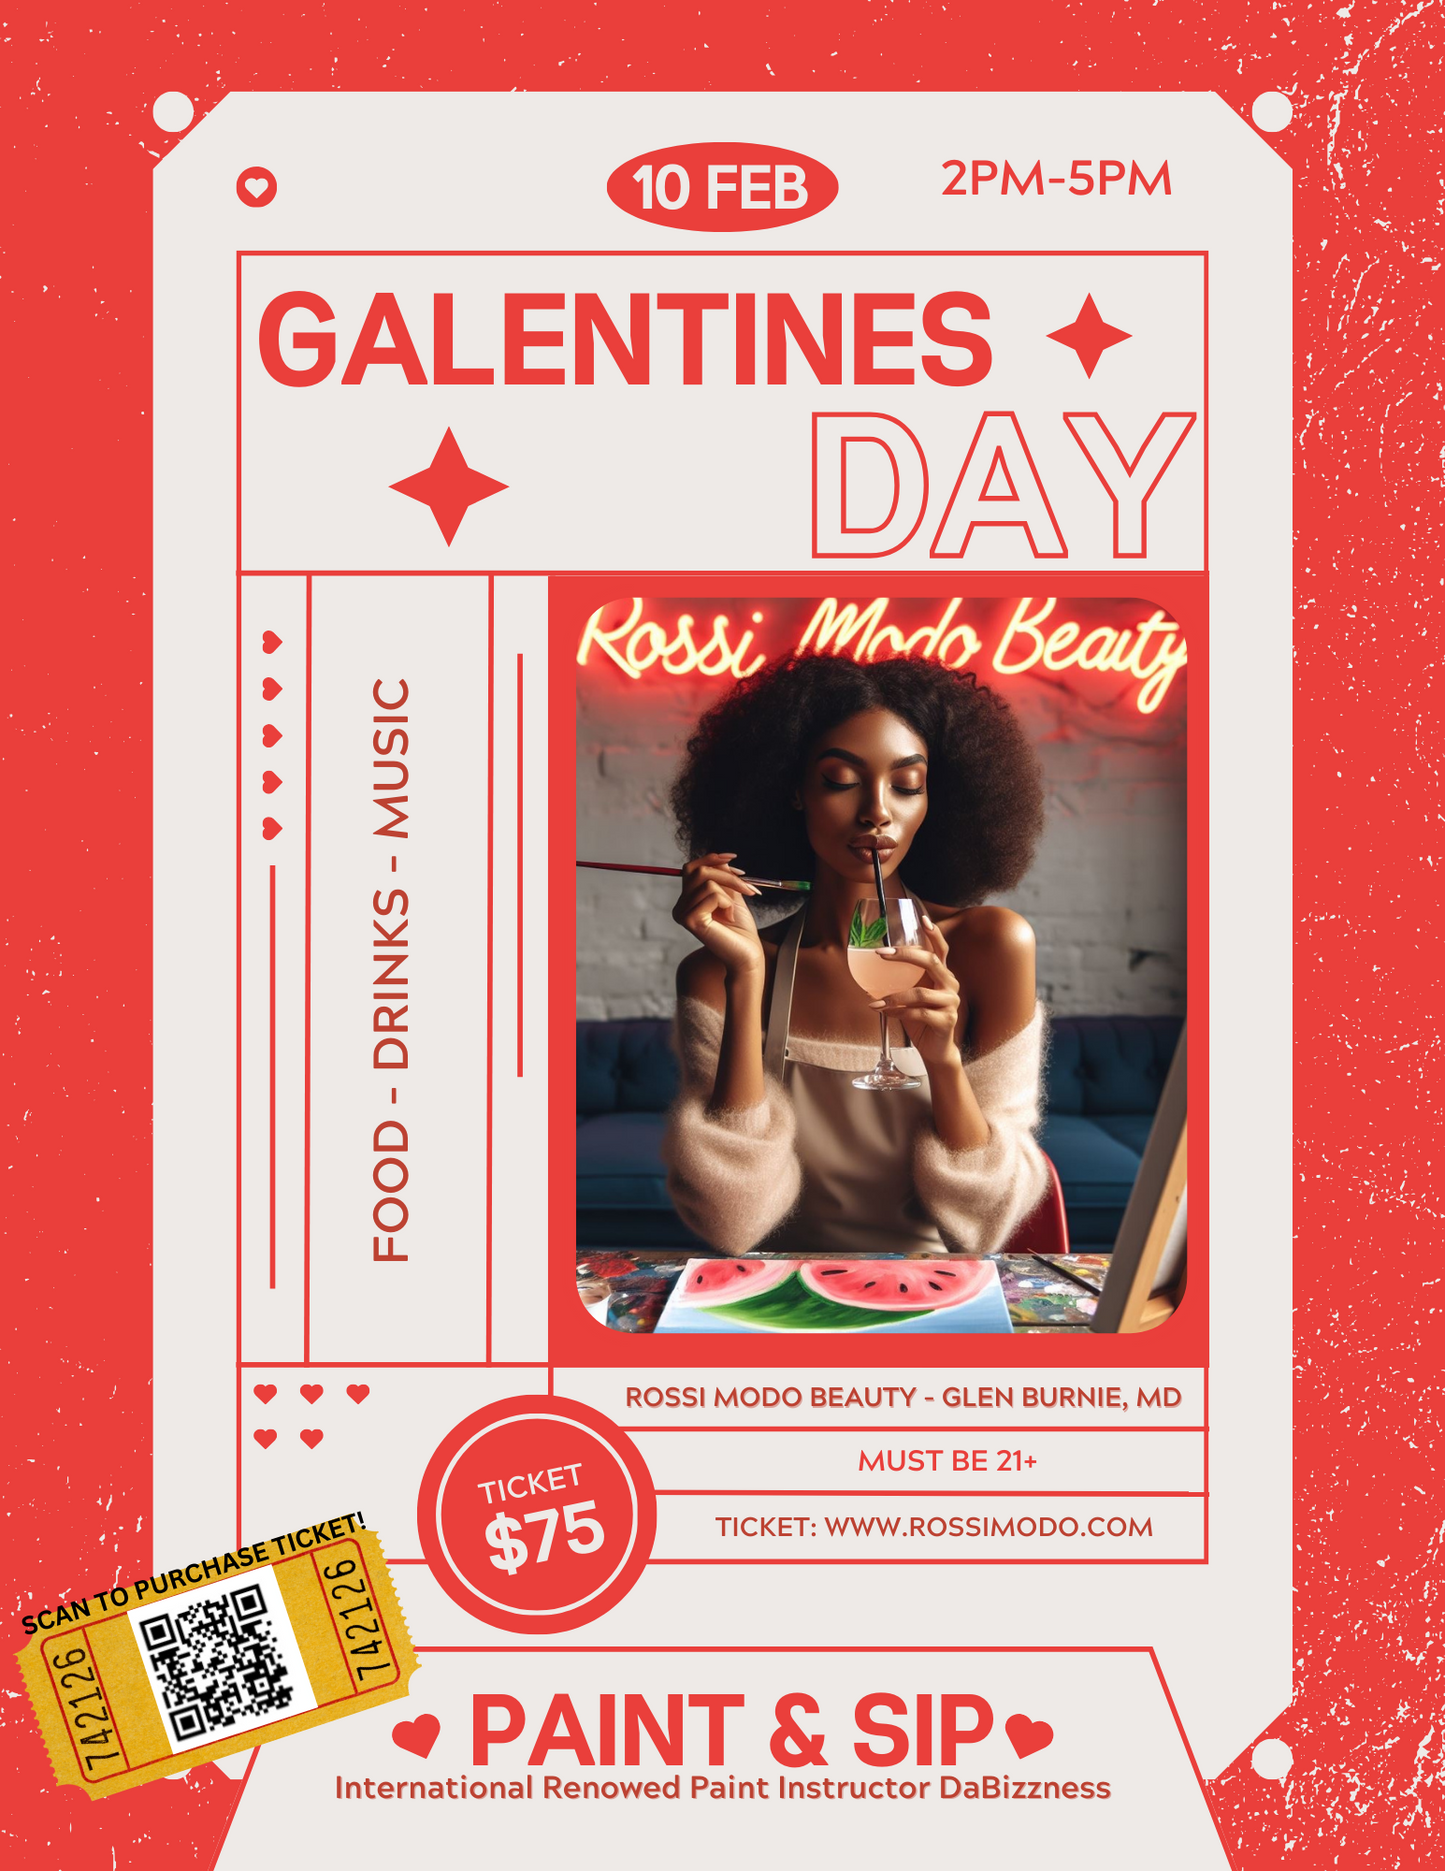 GALENTINES EVENT - 2/10 SIP AND PAINT!